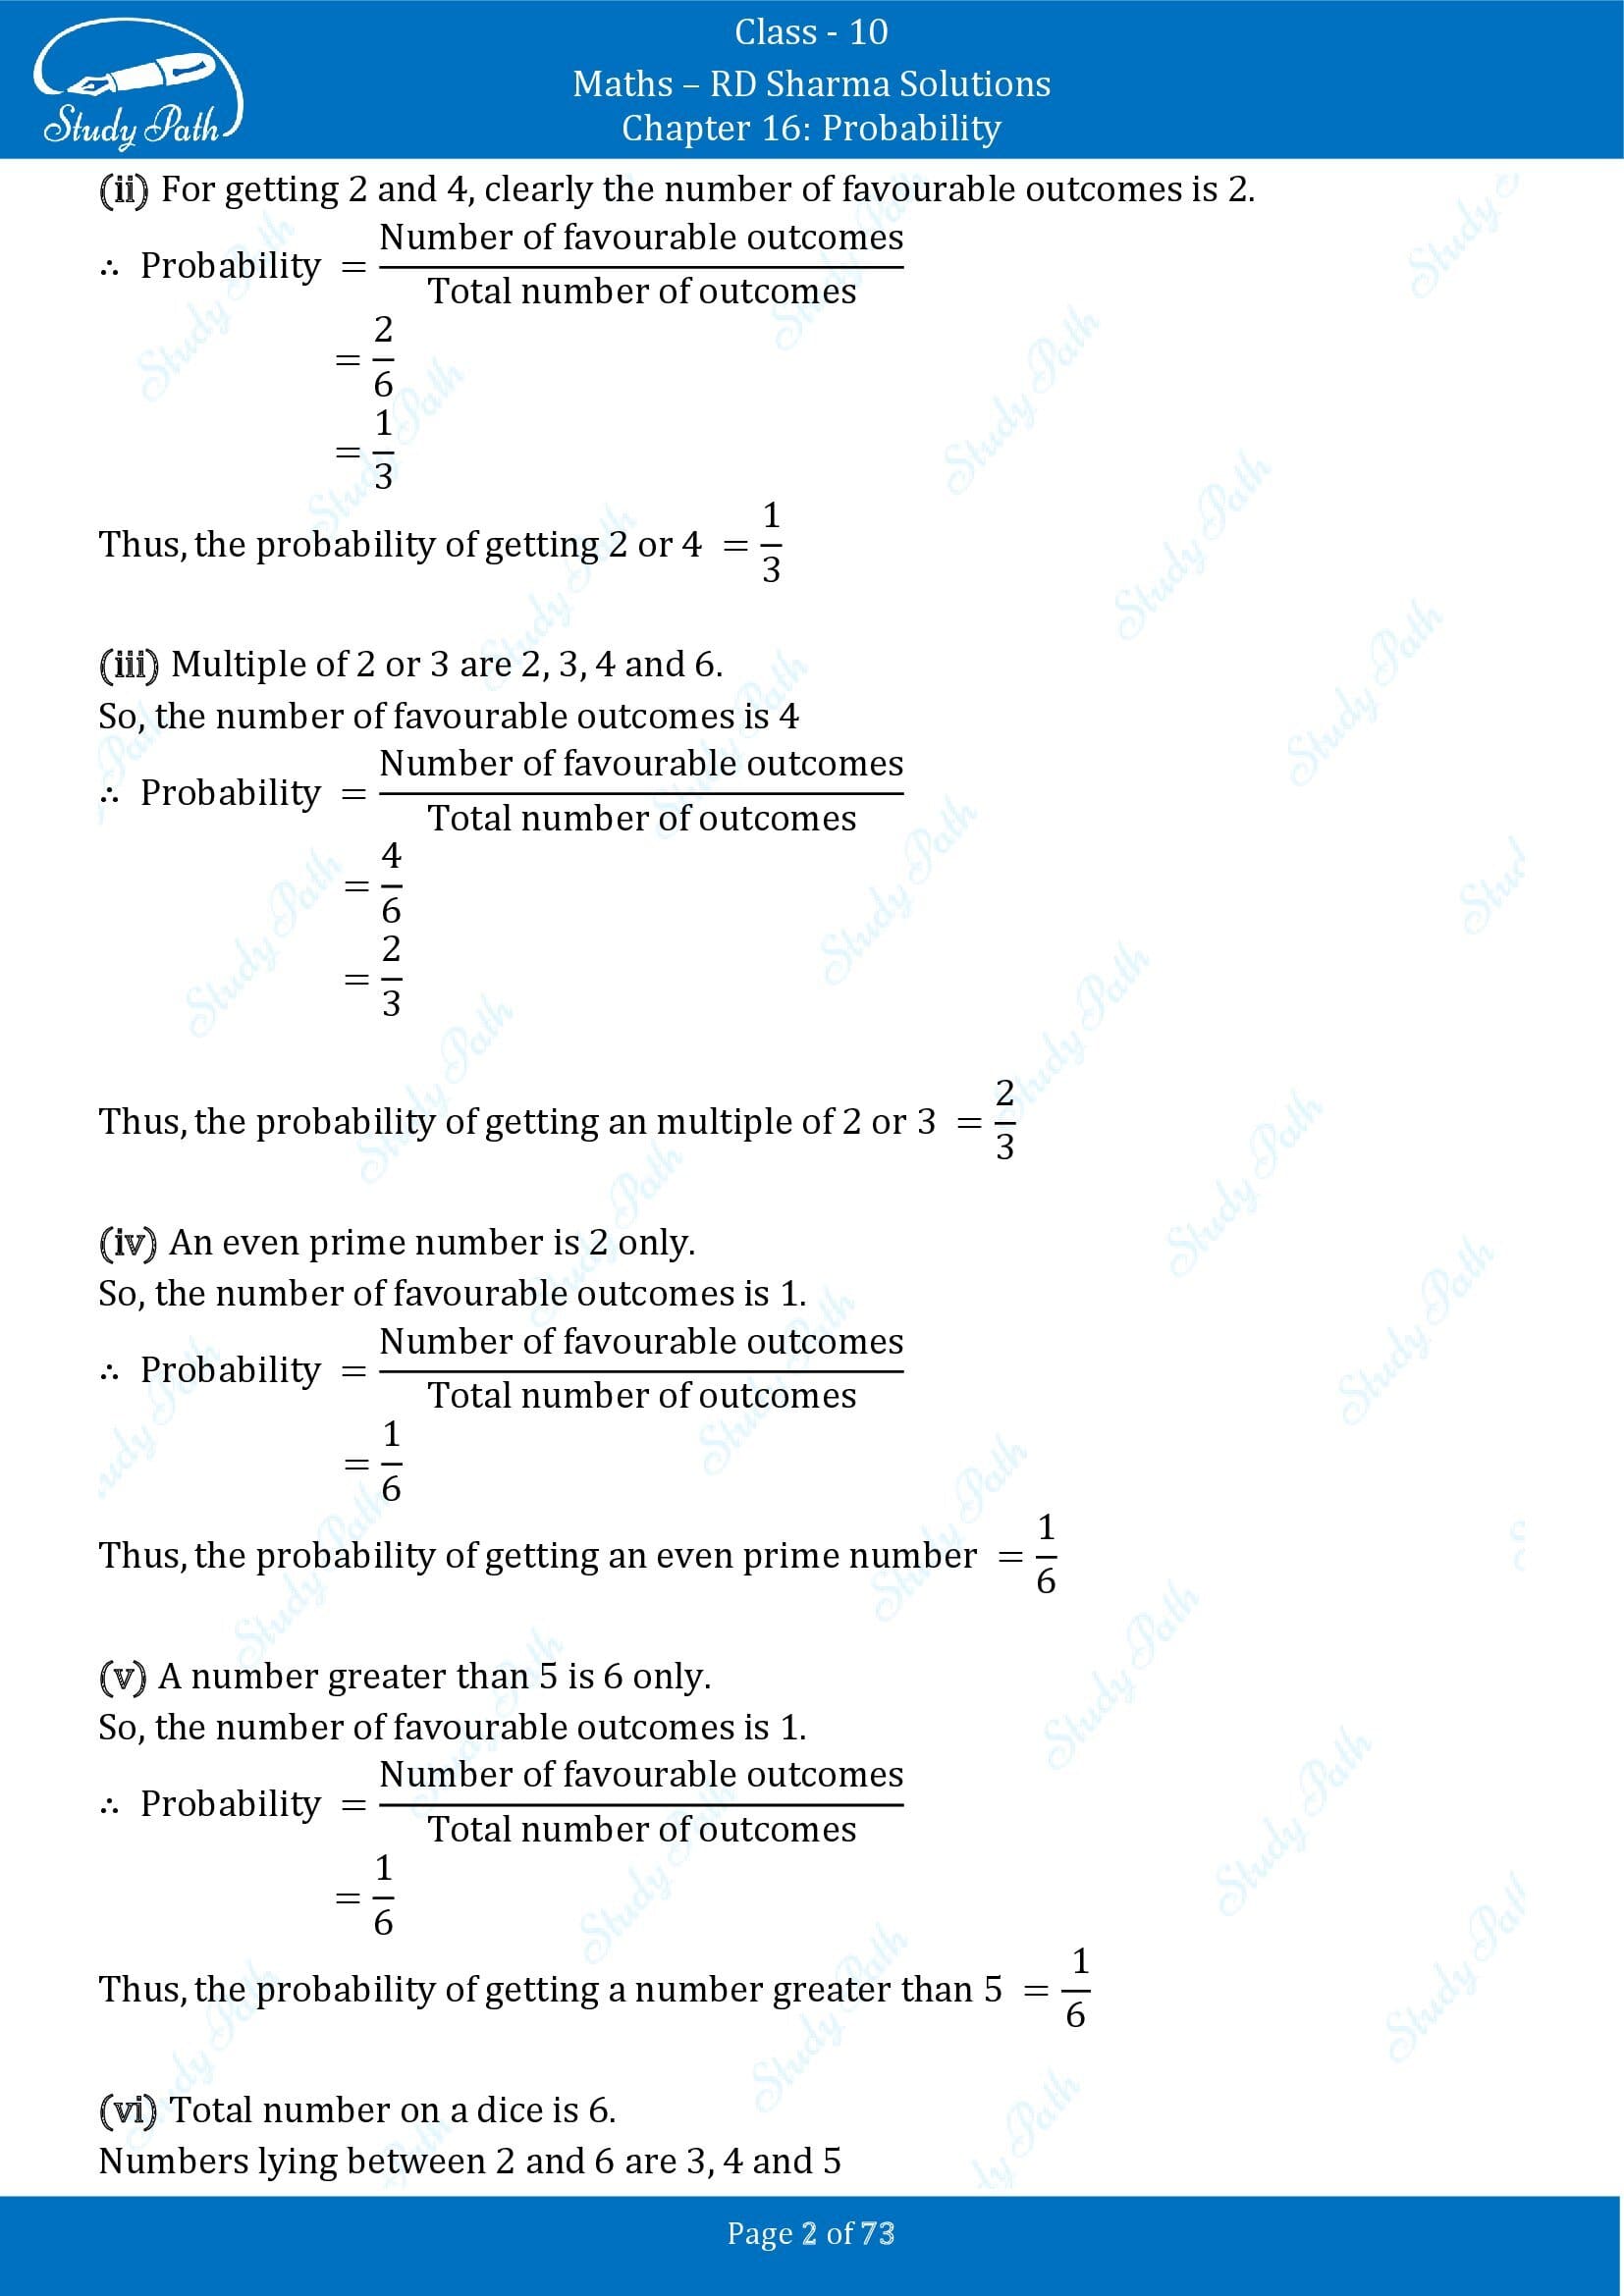 RD Sharma Solutions Class 10 Chapter 16 Probability Exercise 16.1 00002